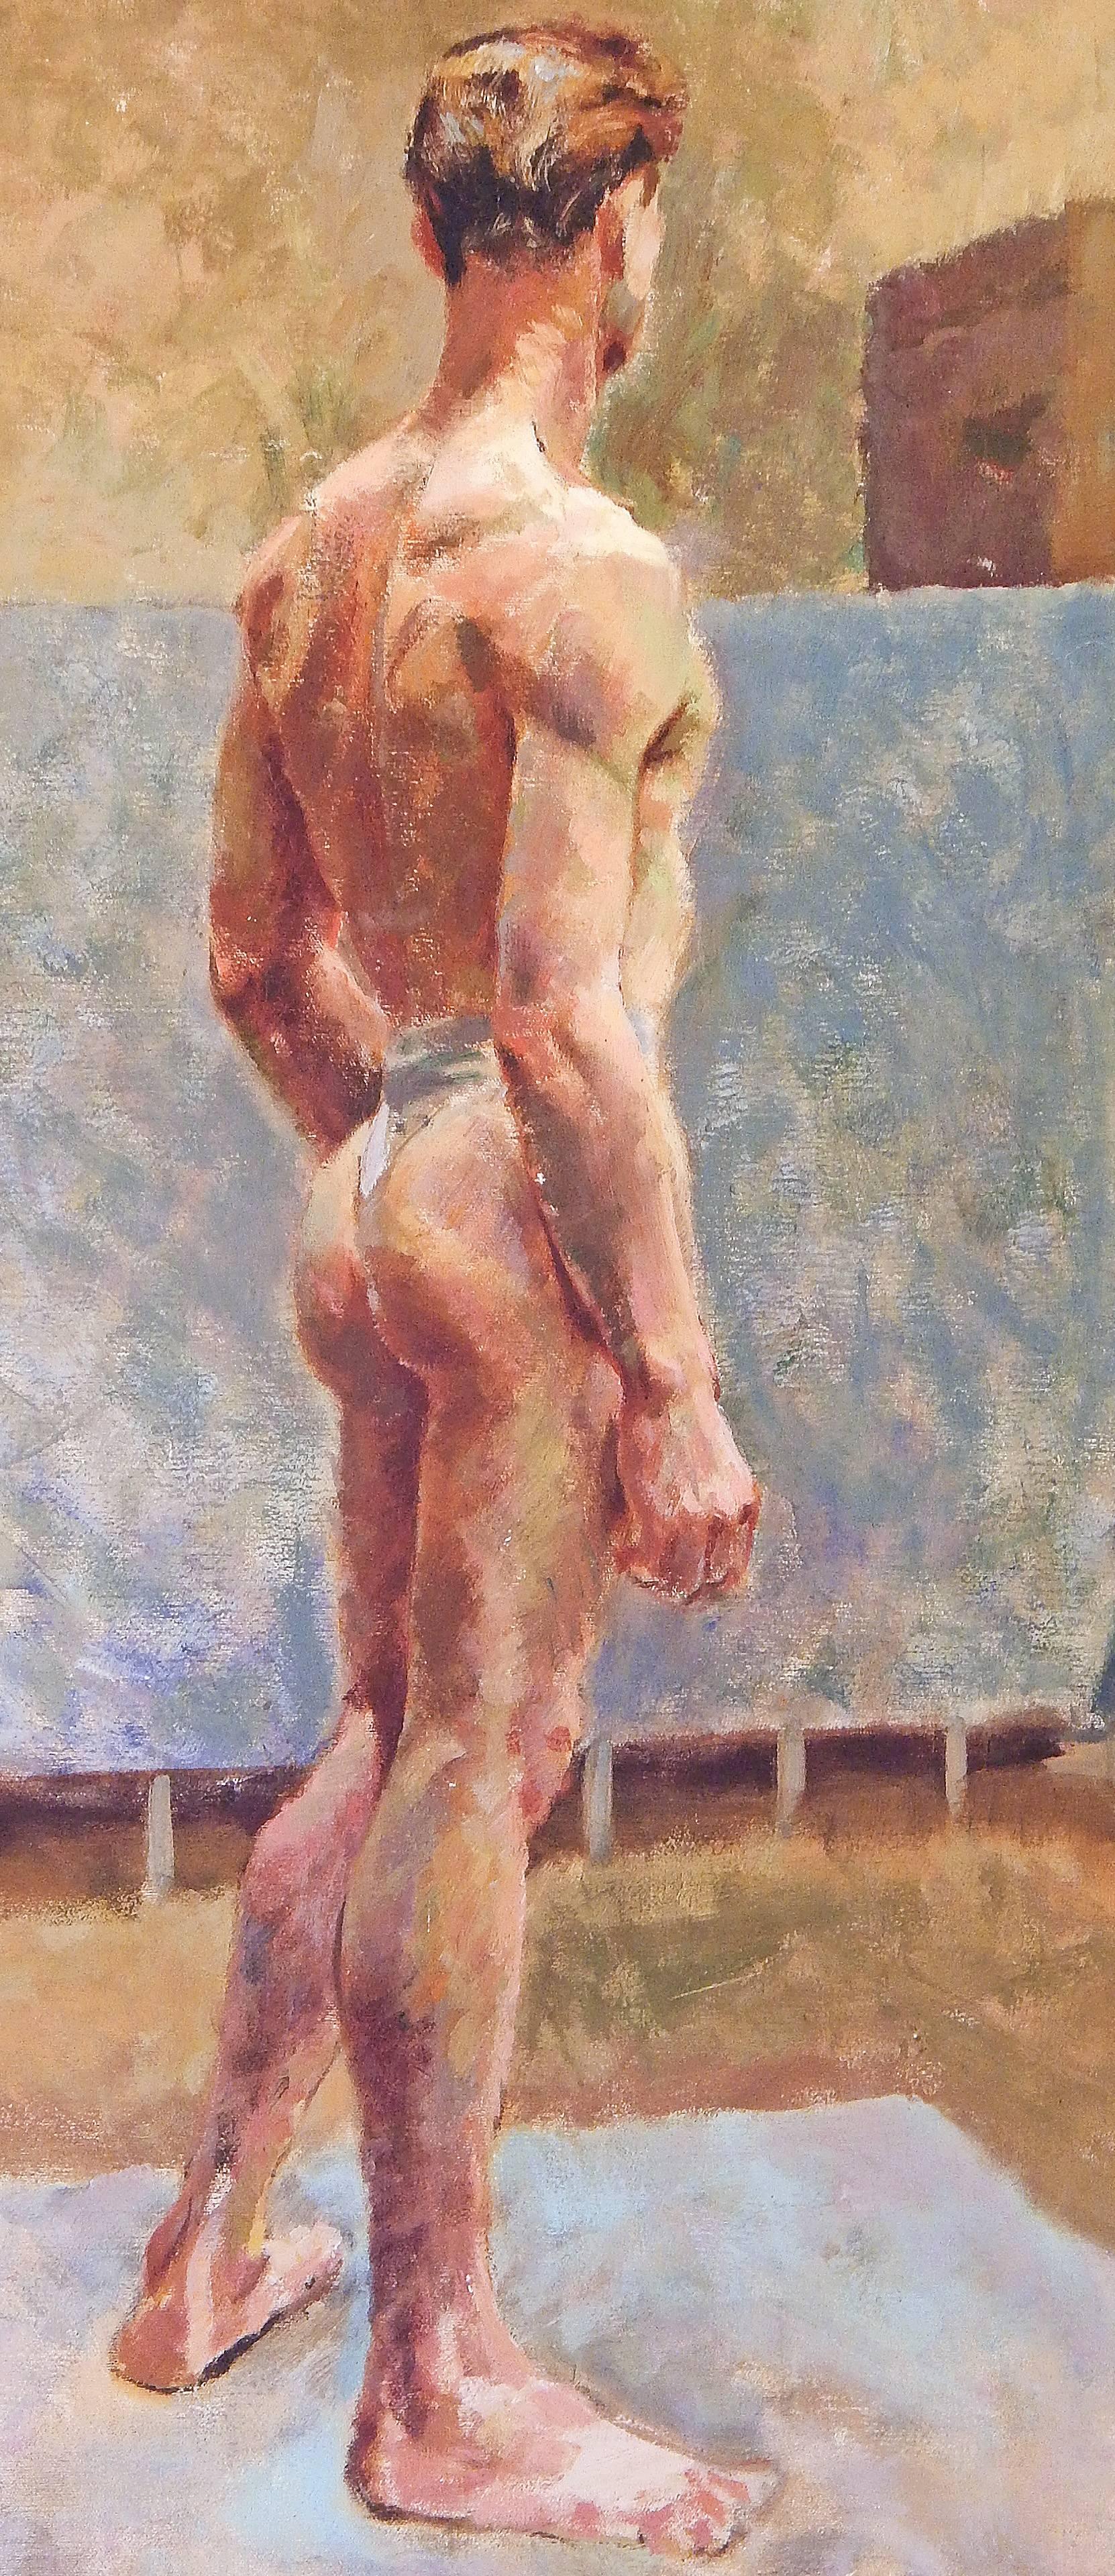 Surrounded by an abstract series of planes in mottled slate and sand hues, this strong and confident nude figural painting was executed by Gaylord Flory when he was only 26, while recovering from wounds received while serving in World War II. After